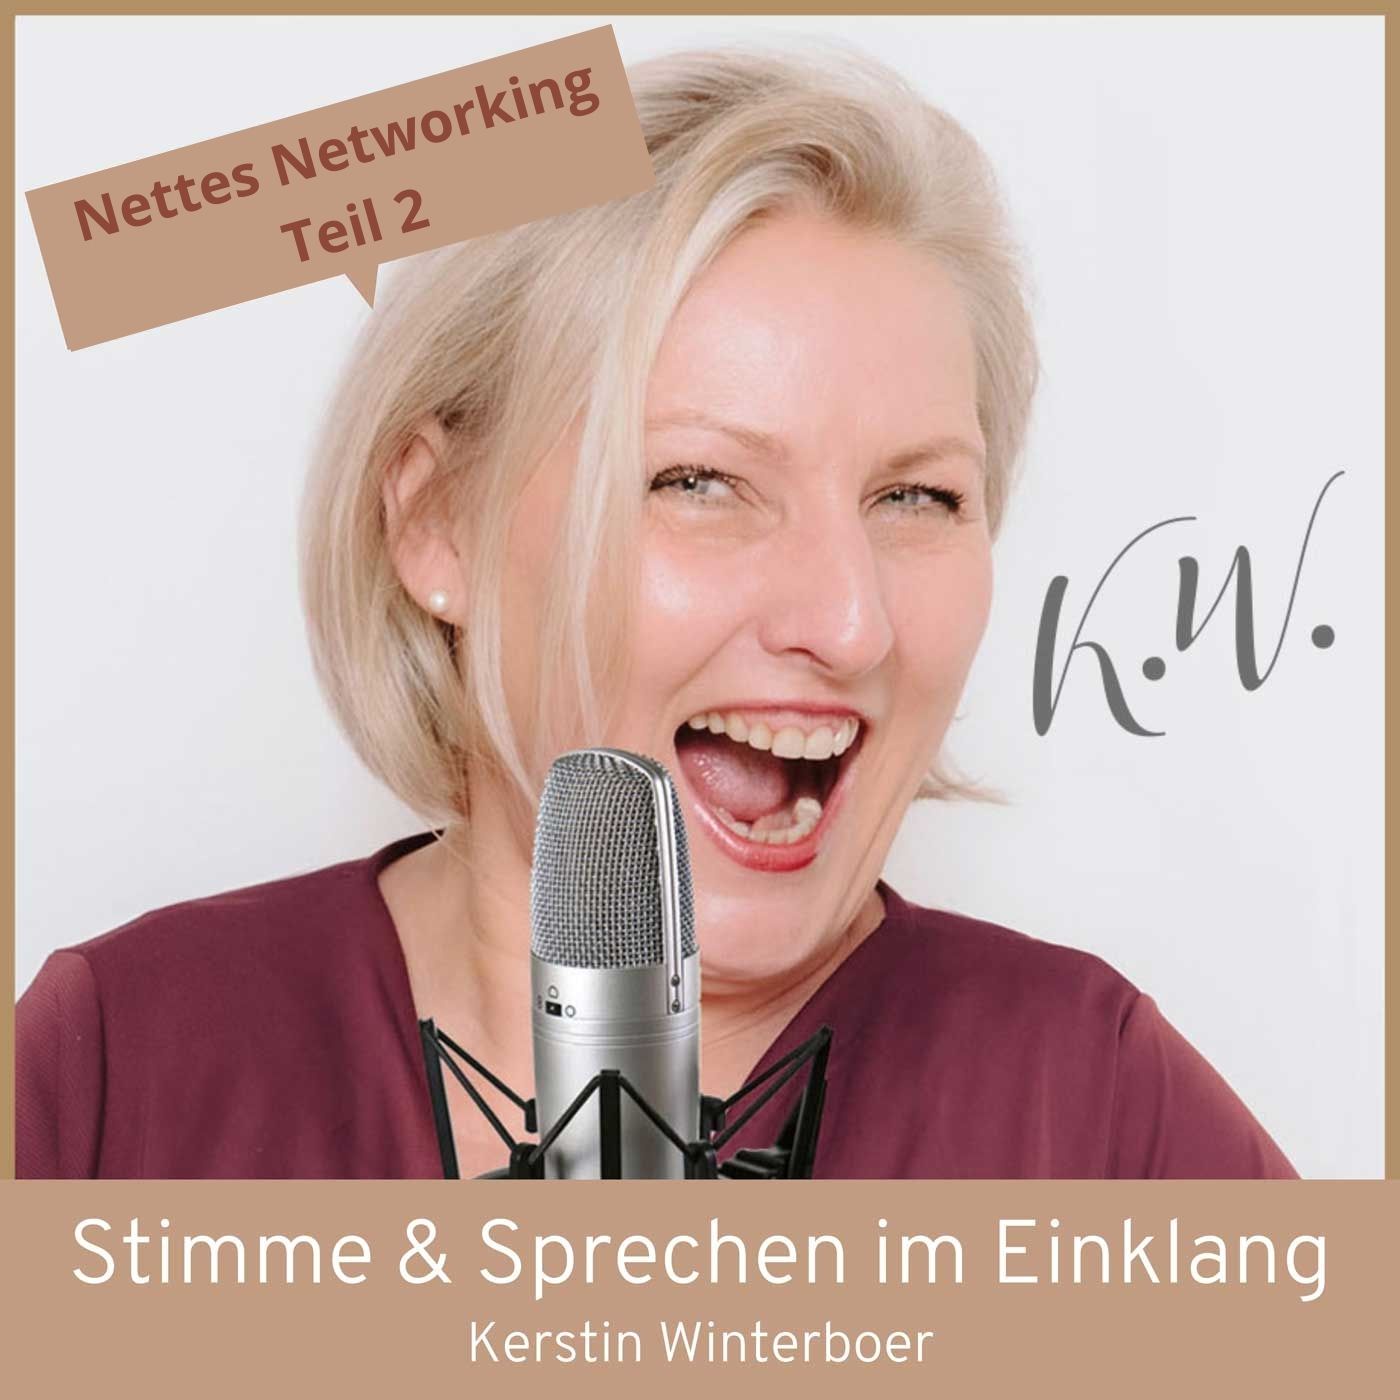 Nettes Networking Teil 2